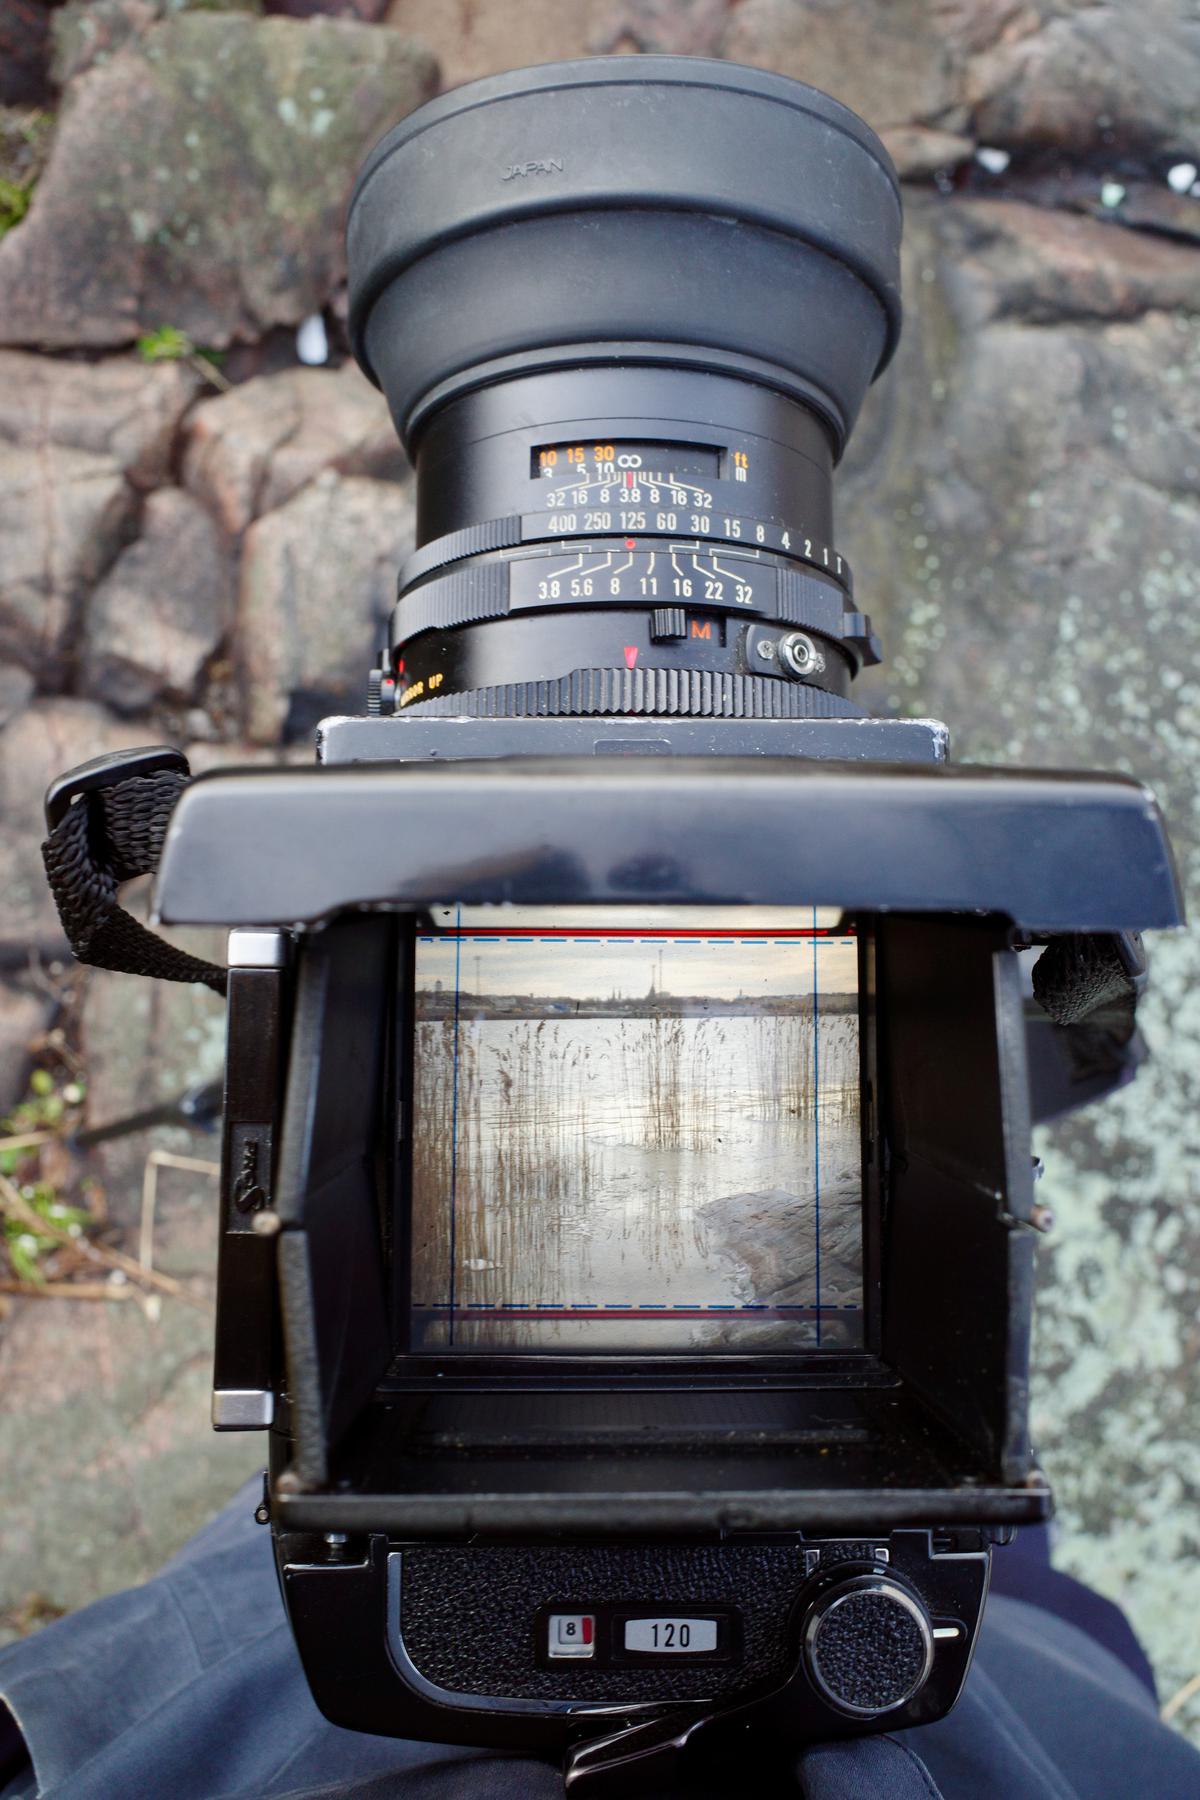 The medium-format camera seen from the above. The viewfinder shows a landscape with rocky seashore and reeds in the front and a city in the background.